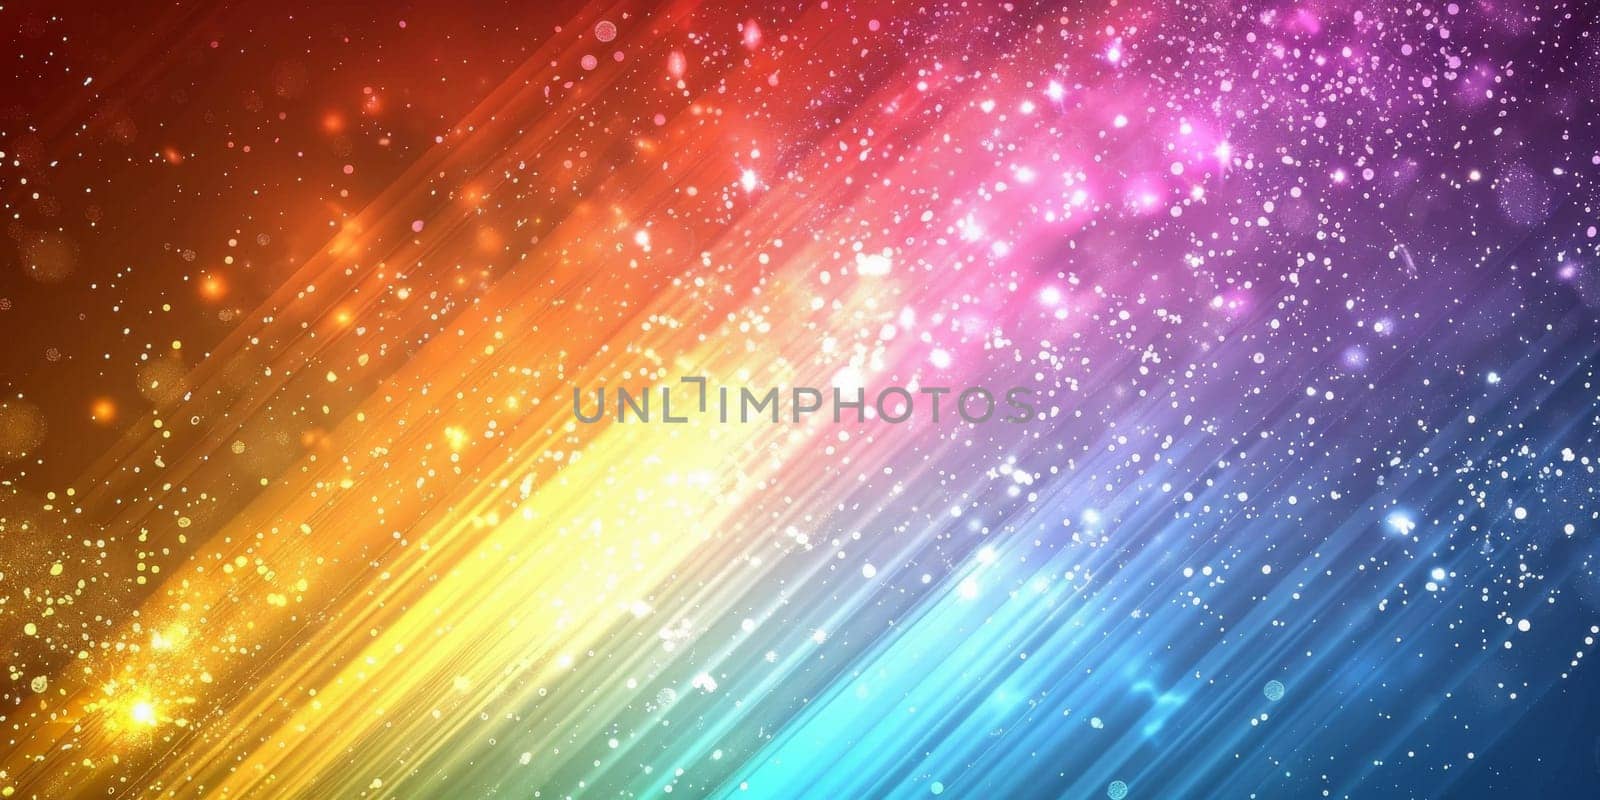 A colorful, multi-colored light display with a rainbow effect. The colors are bright and vibrant, creating a sense of energy and excitement. The image is likely meant to evoke feelings of joy